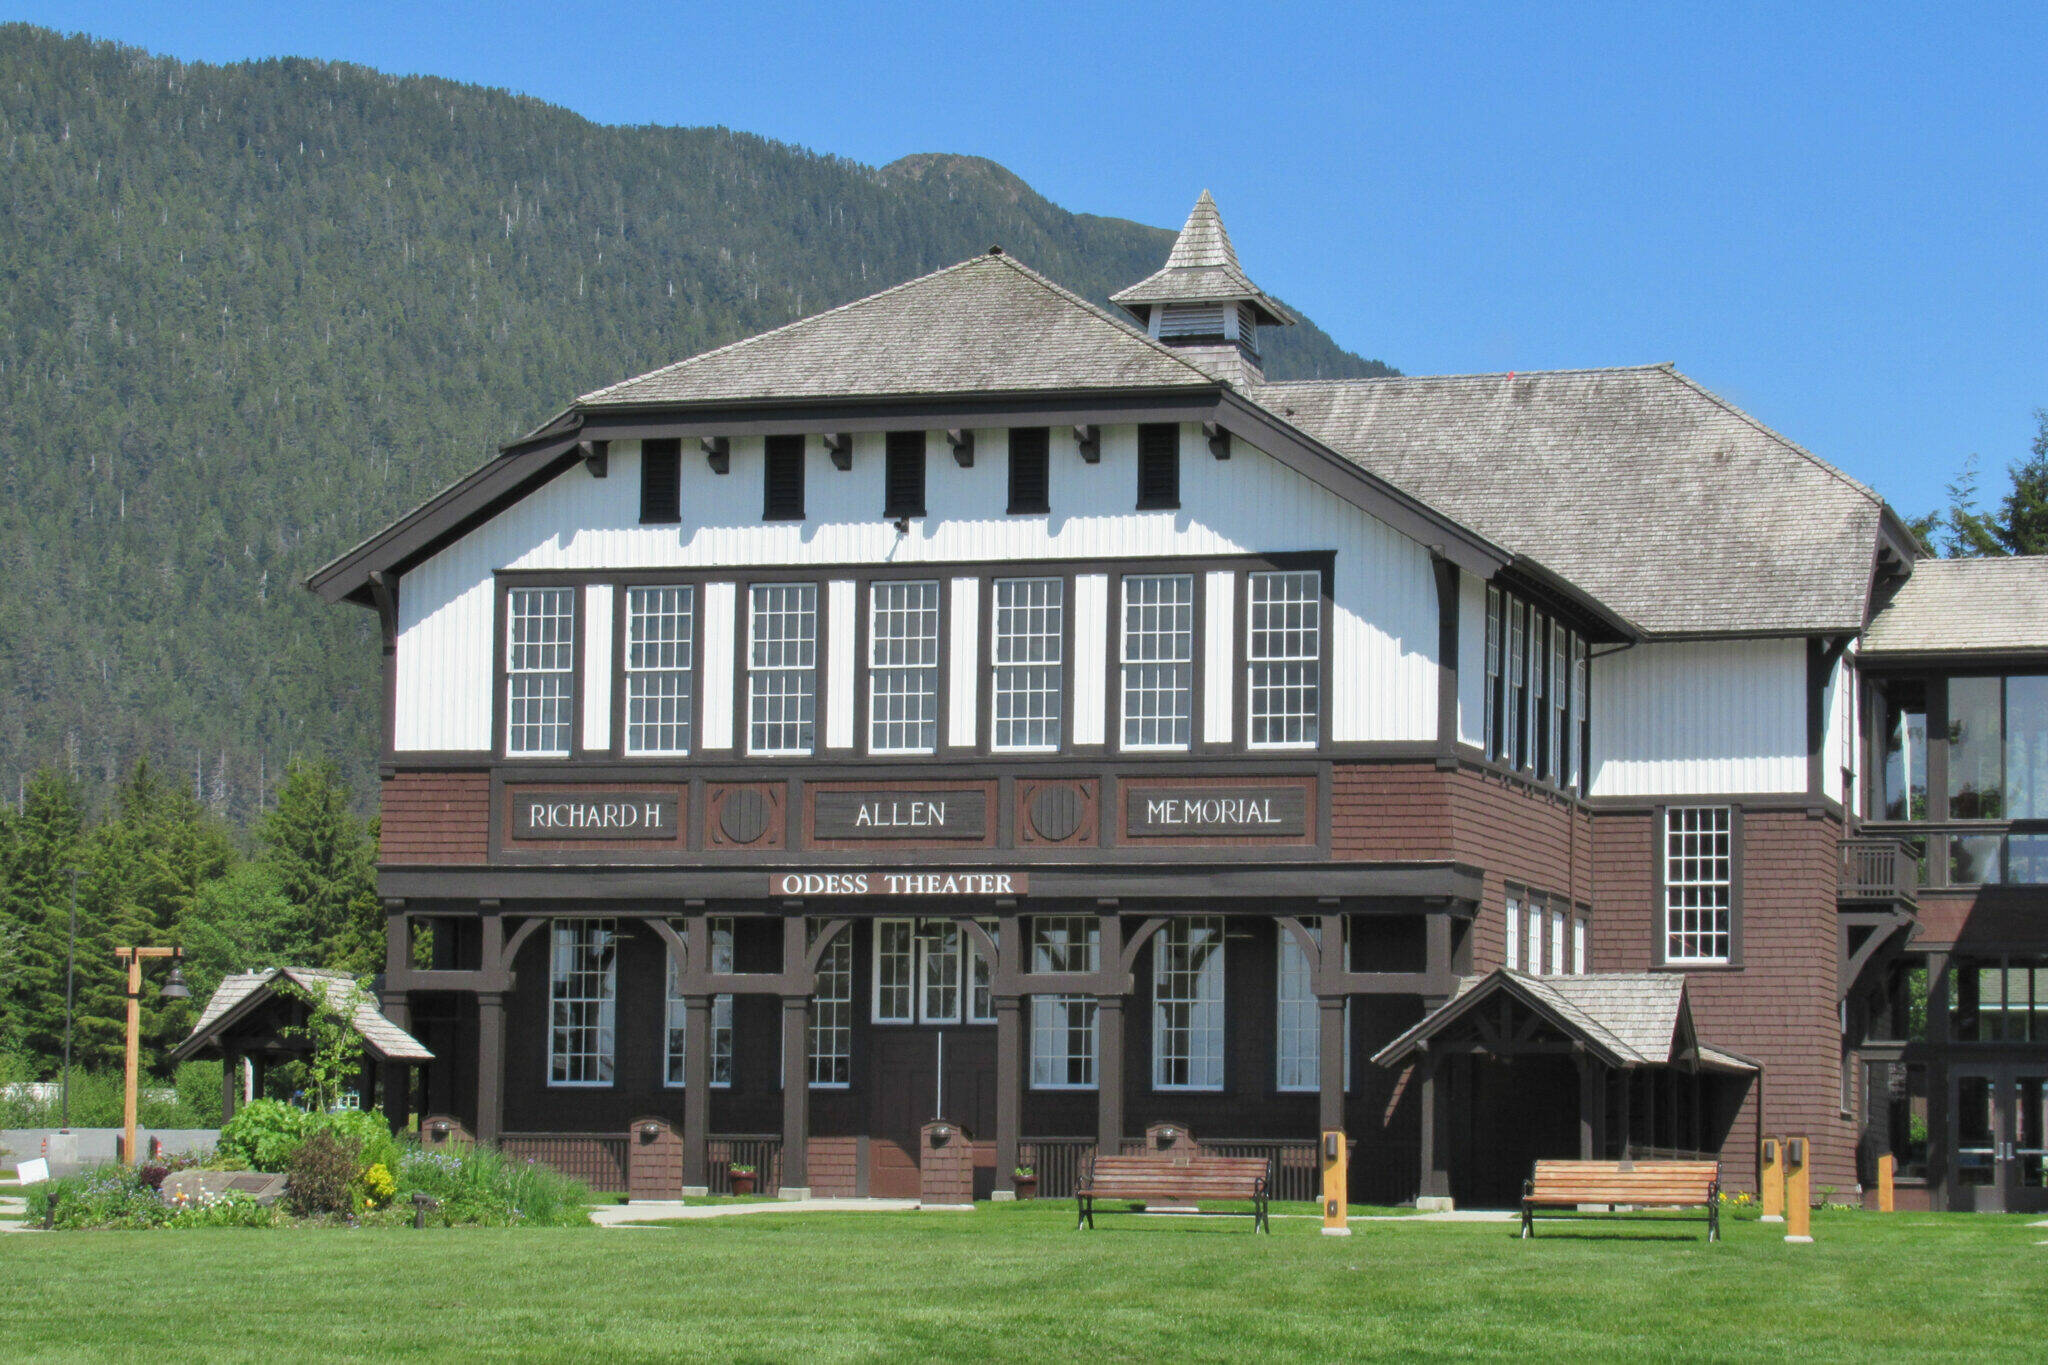 The Odess Theater is seen on May 22, 2019, on the campus of the Sitka Fine Arts Camp, which operates the former home of Sheldon Jackson College. (Photo by Flickr user Jasperdo/Creative Commons)